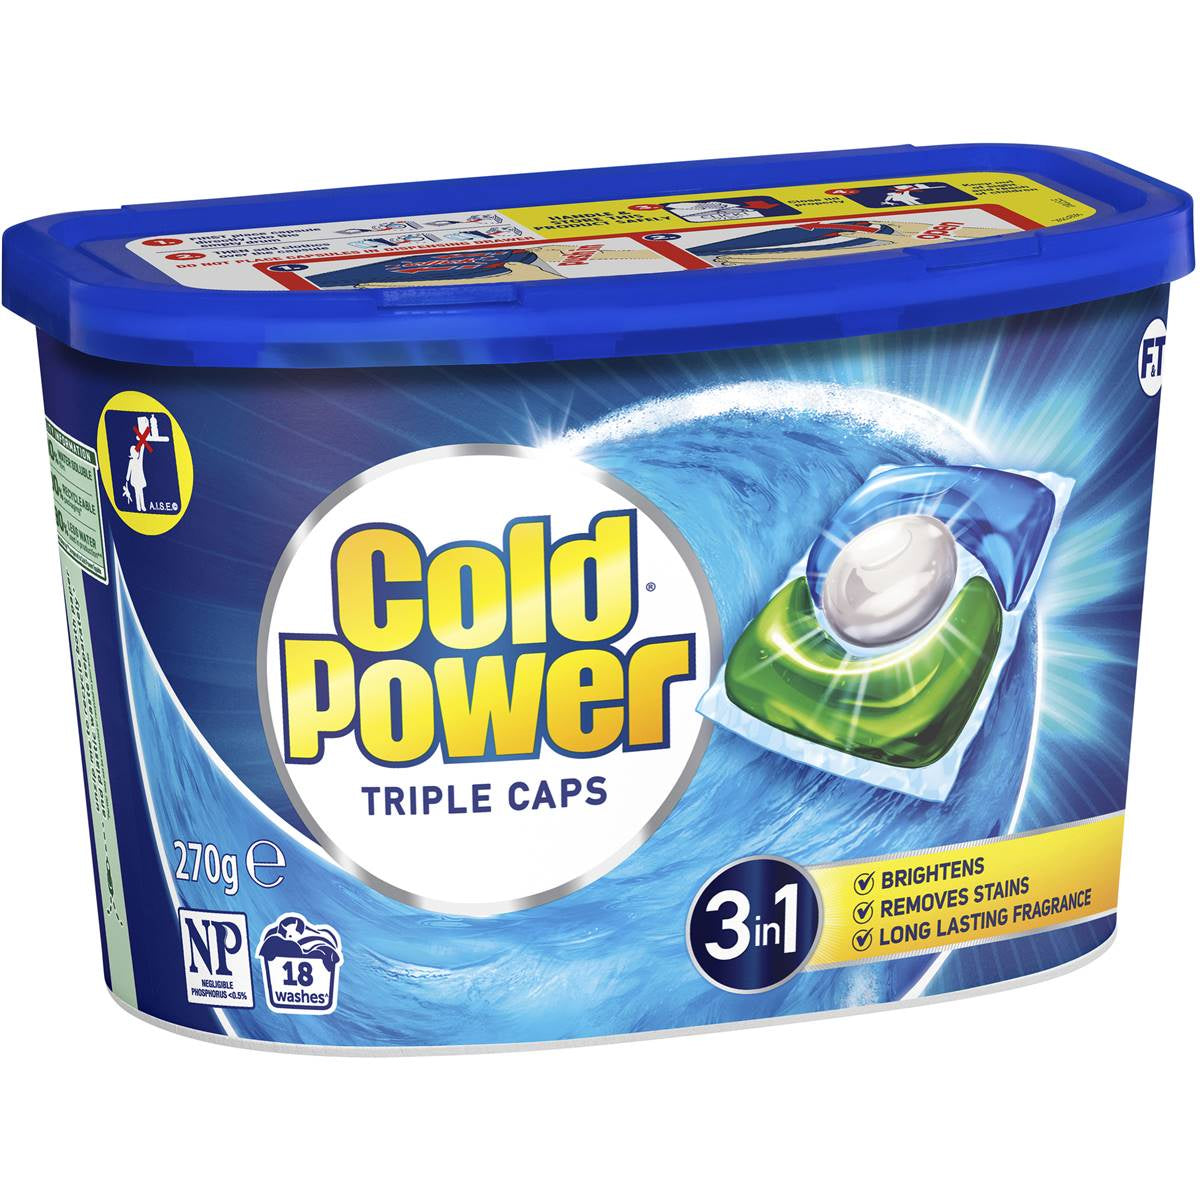 Cold Power Regular Laundry Detergent Triple Capsules 18 Pack